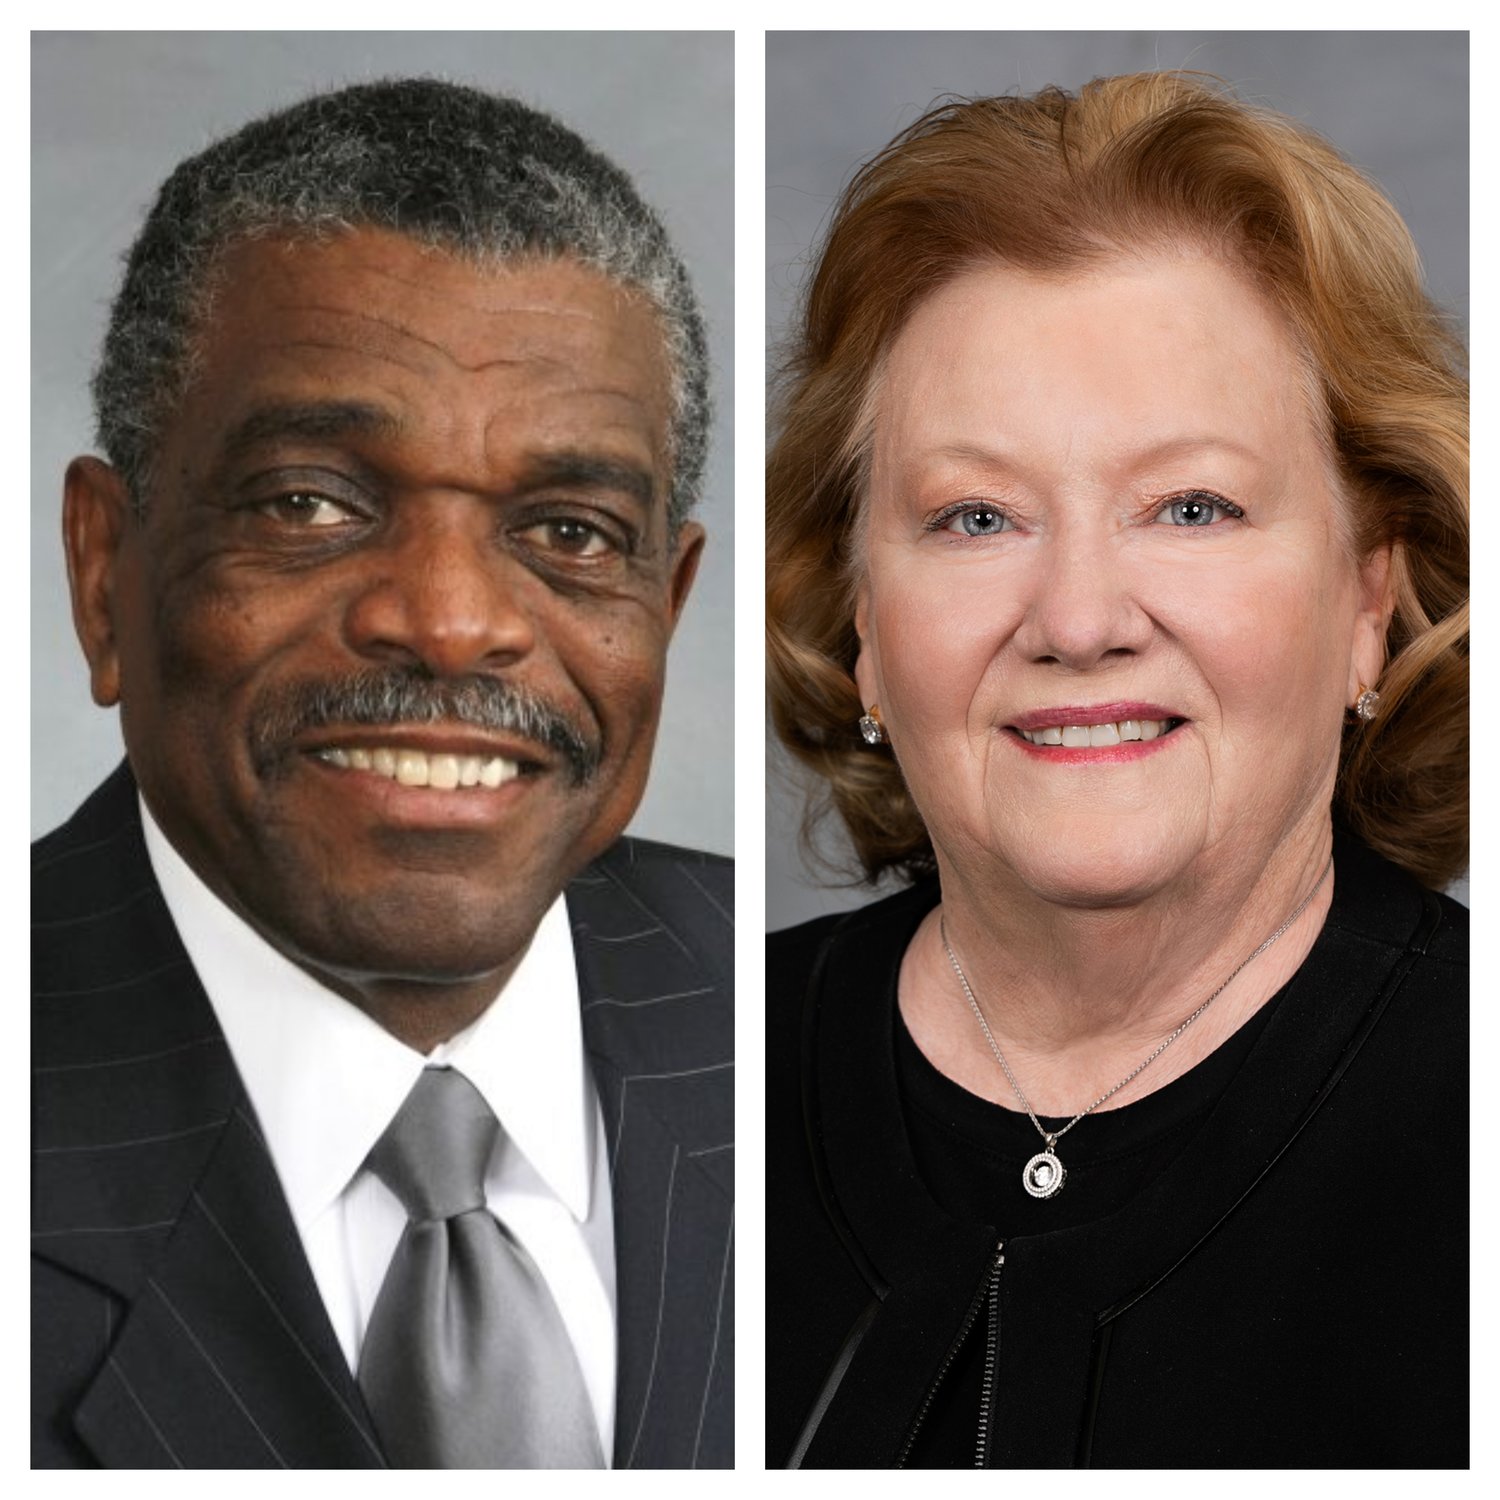 Democrat Elmer Floyd and Republican Diane Wheatley are vying for the N.C. House District 43 seat.